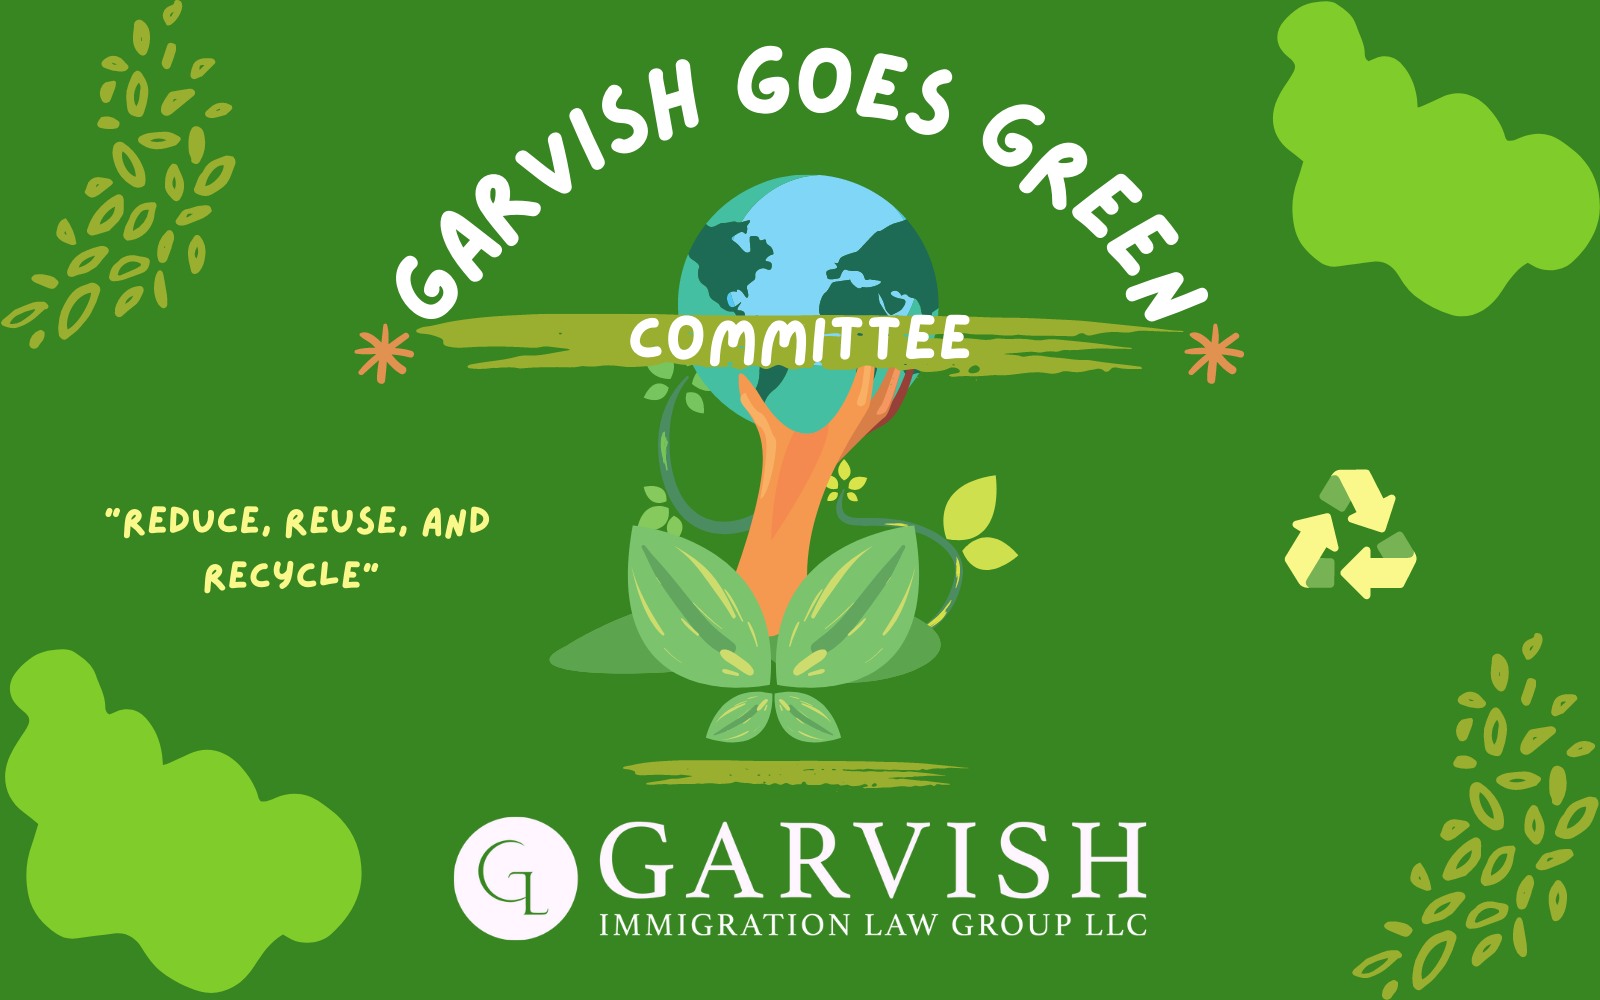 Garvish Immigration Going Green Committee Reduce Reuse Recycle Earth Day